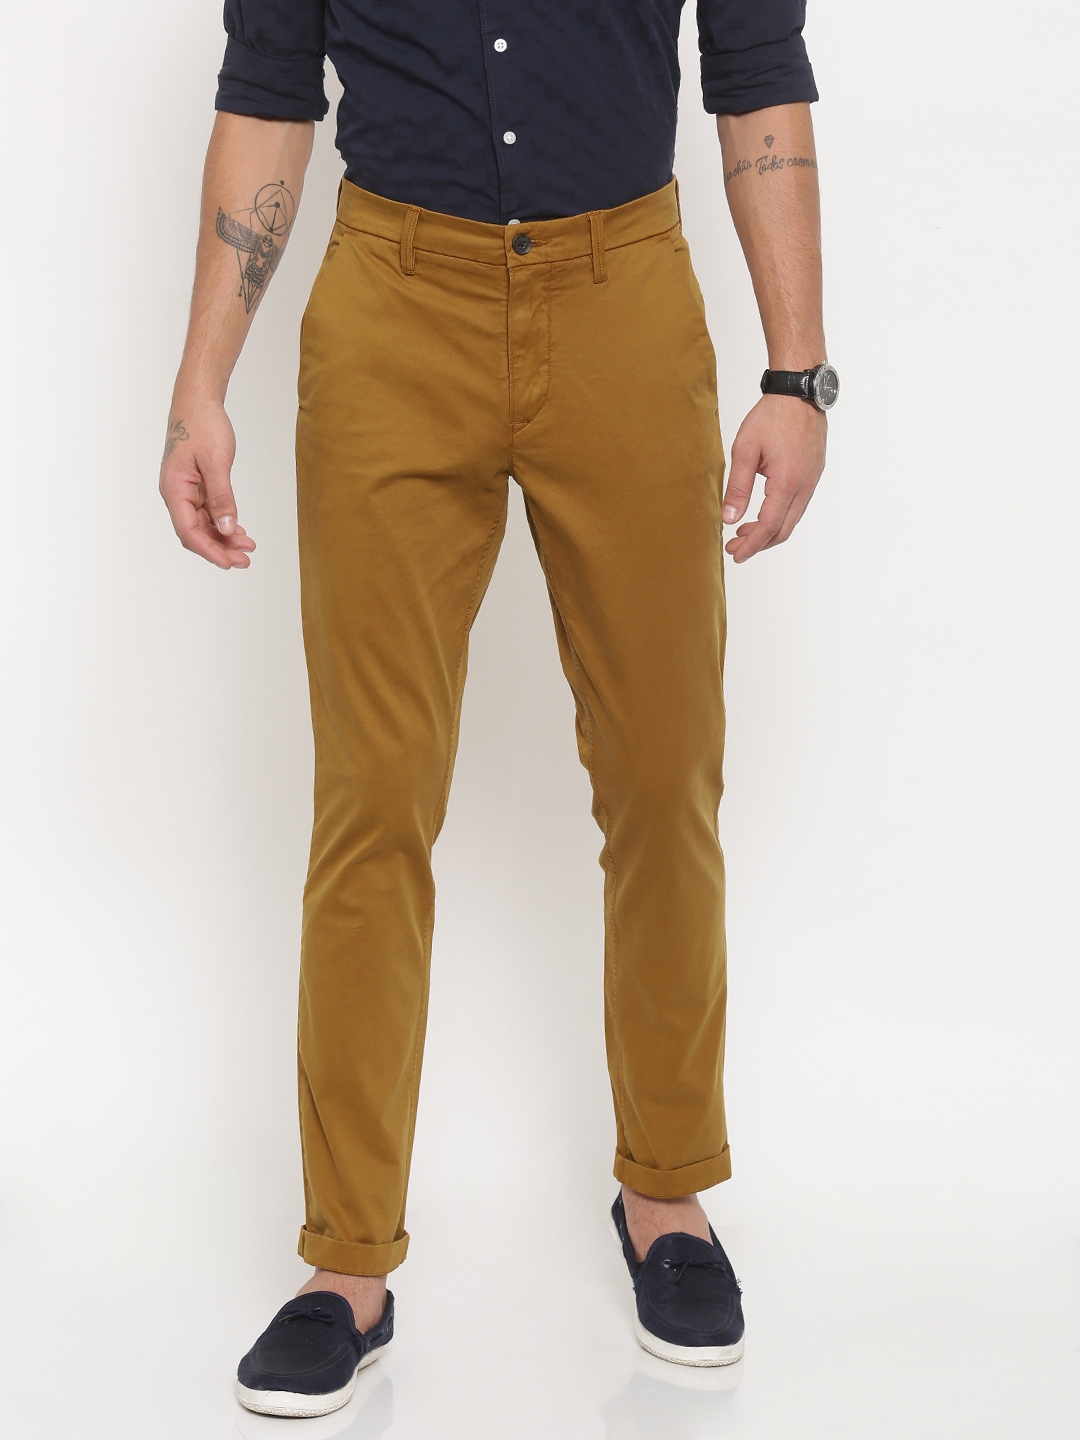 Buy LIFE Mustard Mens 8 Pocket Solid Cargo Pants  Shoppers Stop